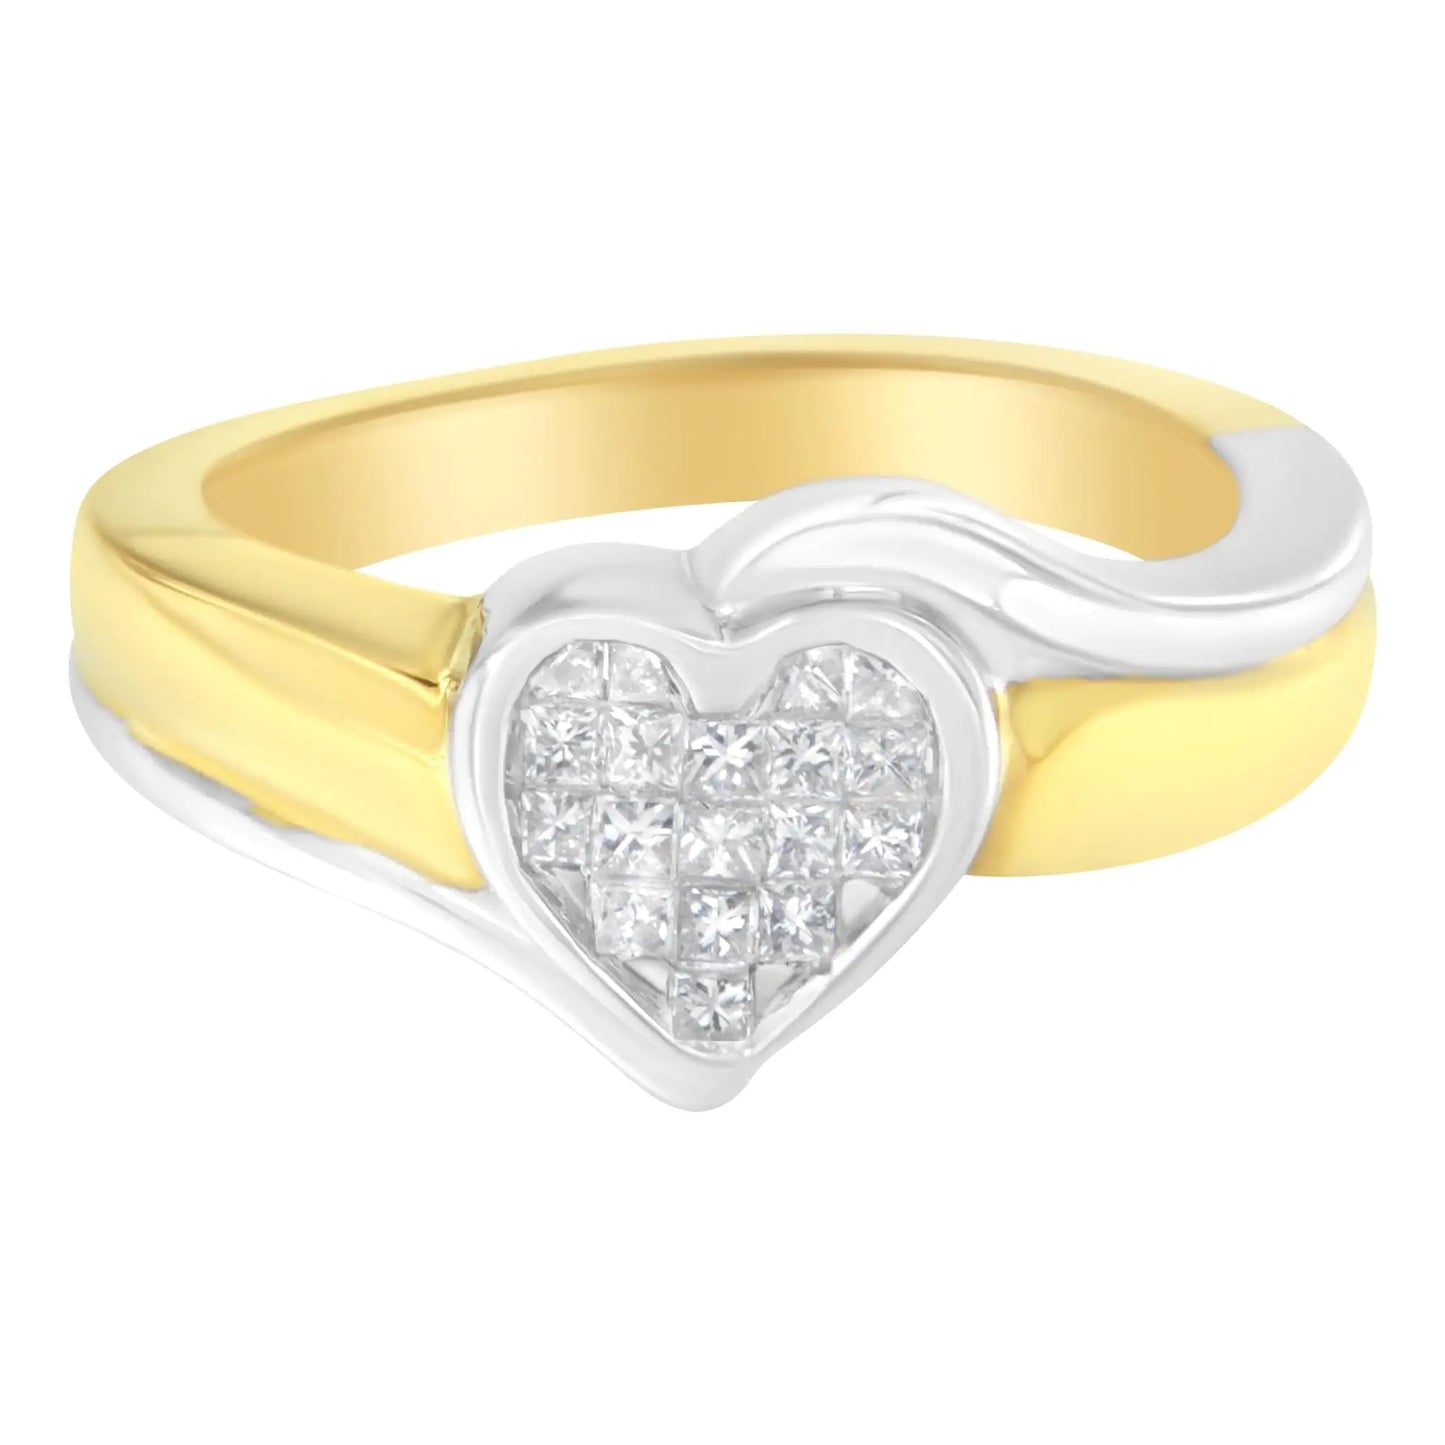 14K Two-Toned Gold Princess-Cut Diamond Heart Promise Ring (1/4 Cttw, H-I Color, I1-I2 Clarity)